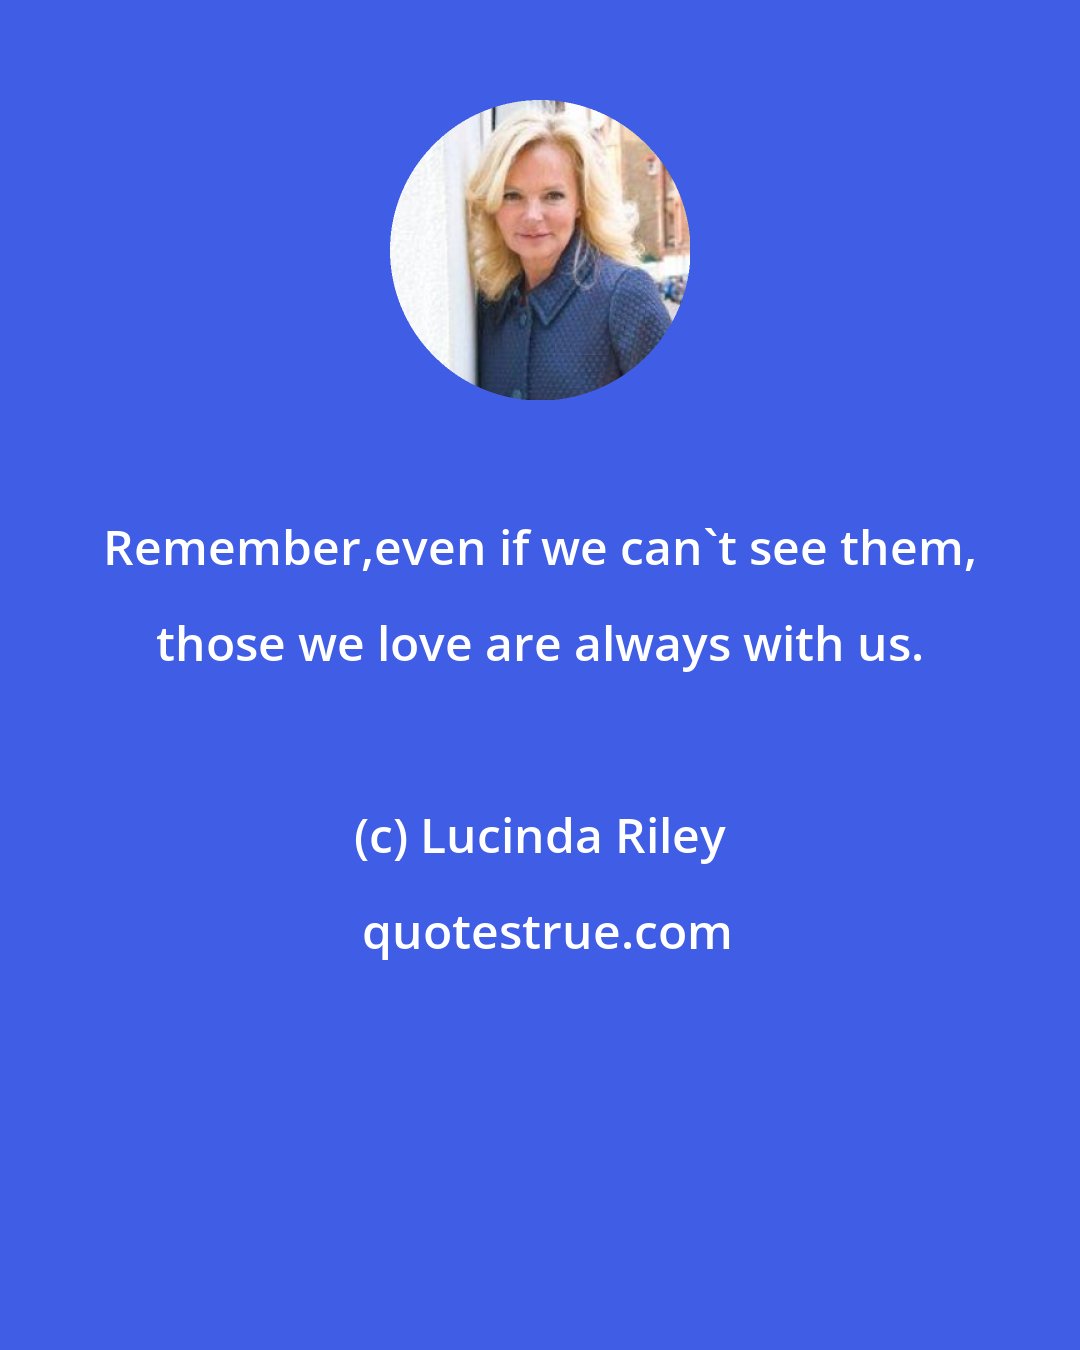 Lucinda Riley: Remember,even if we can't see them, those we love are always with us.